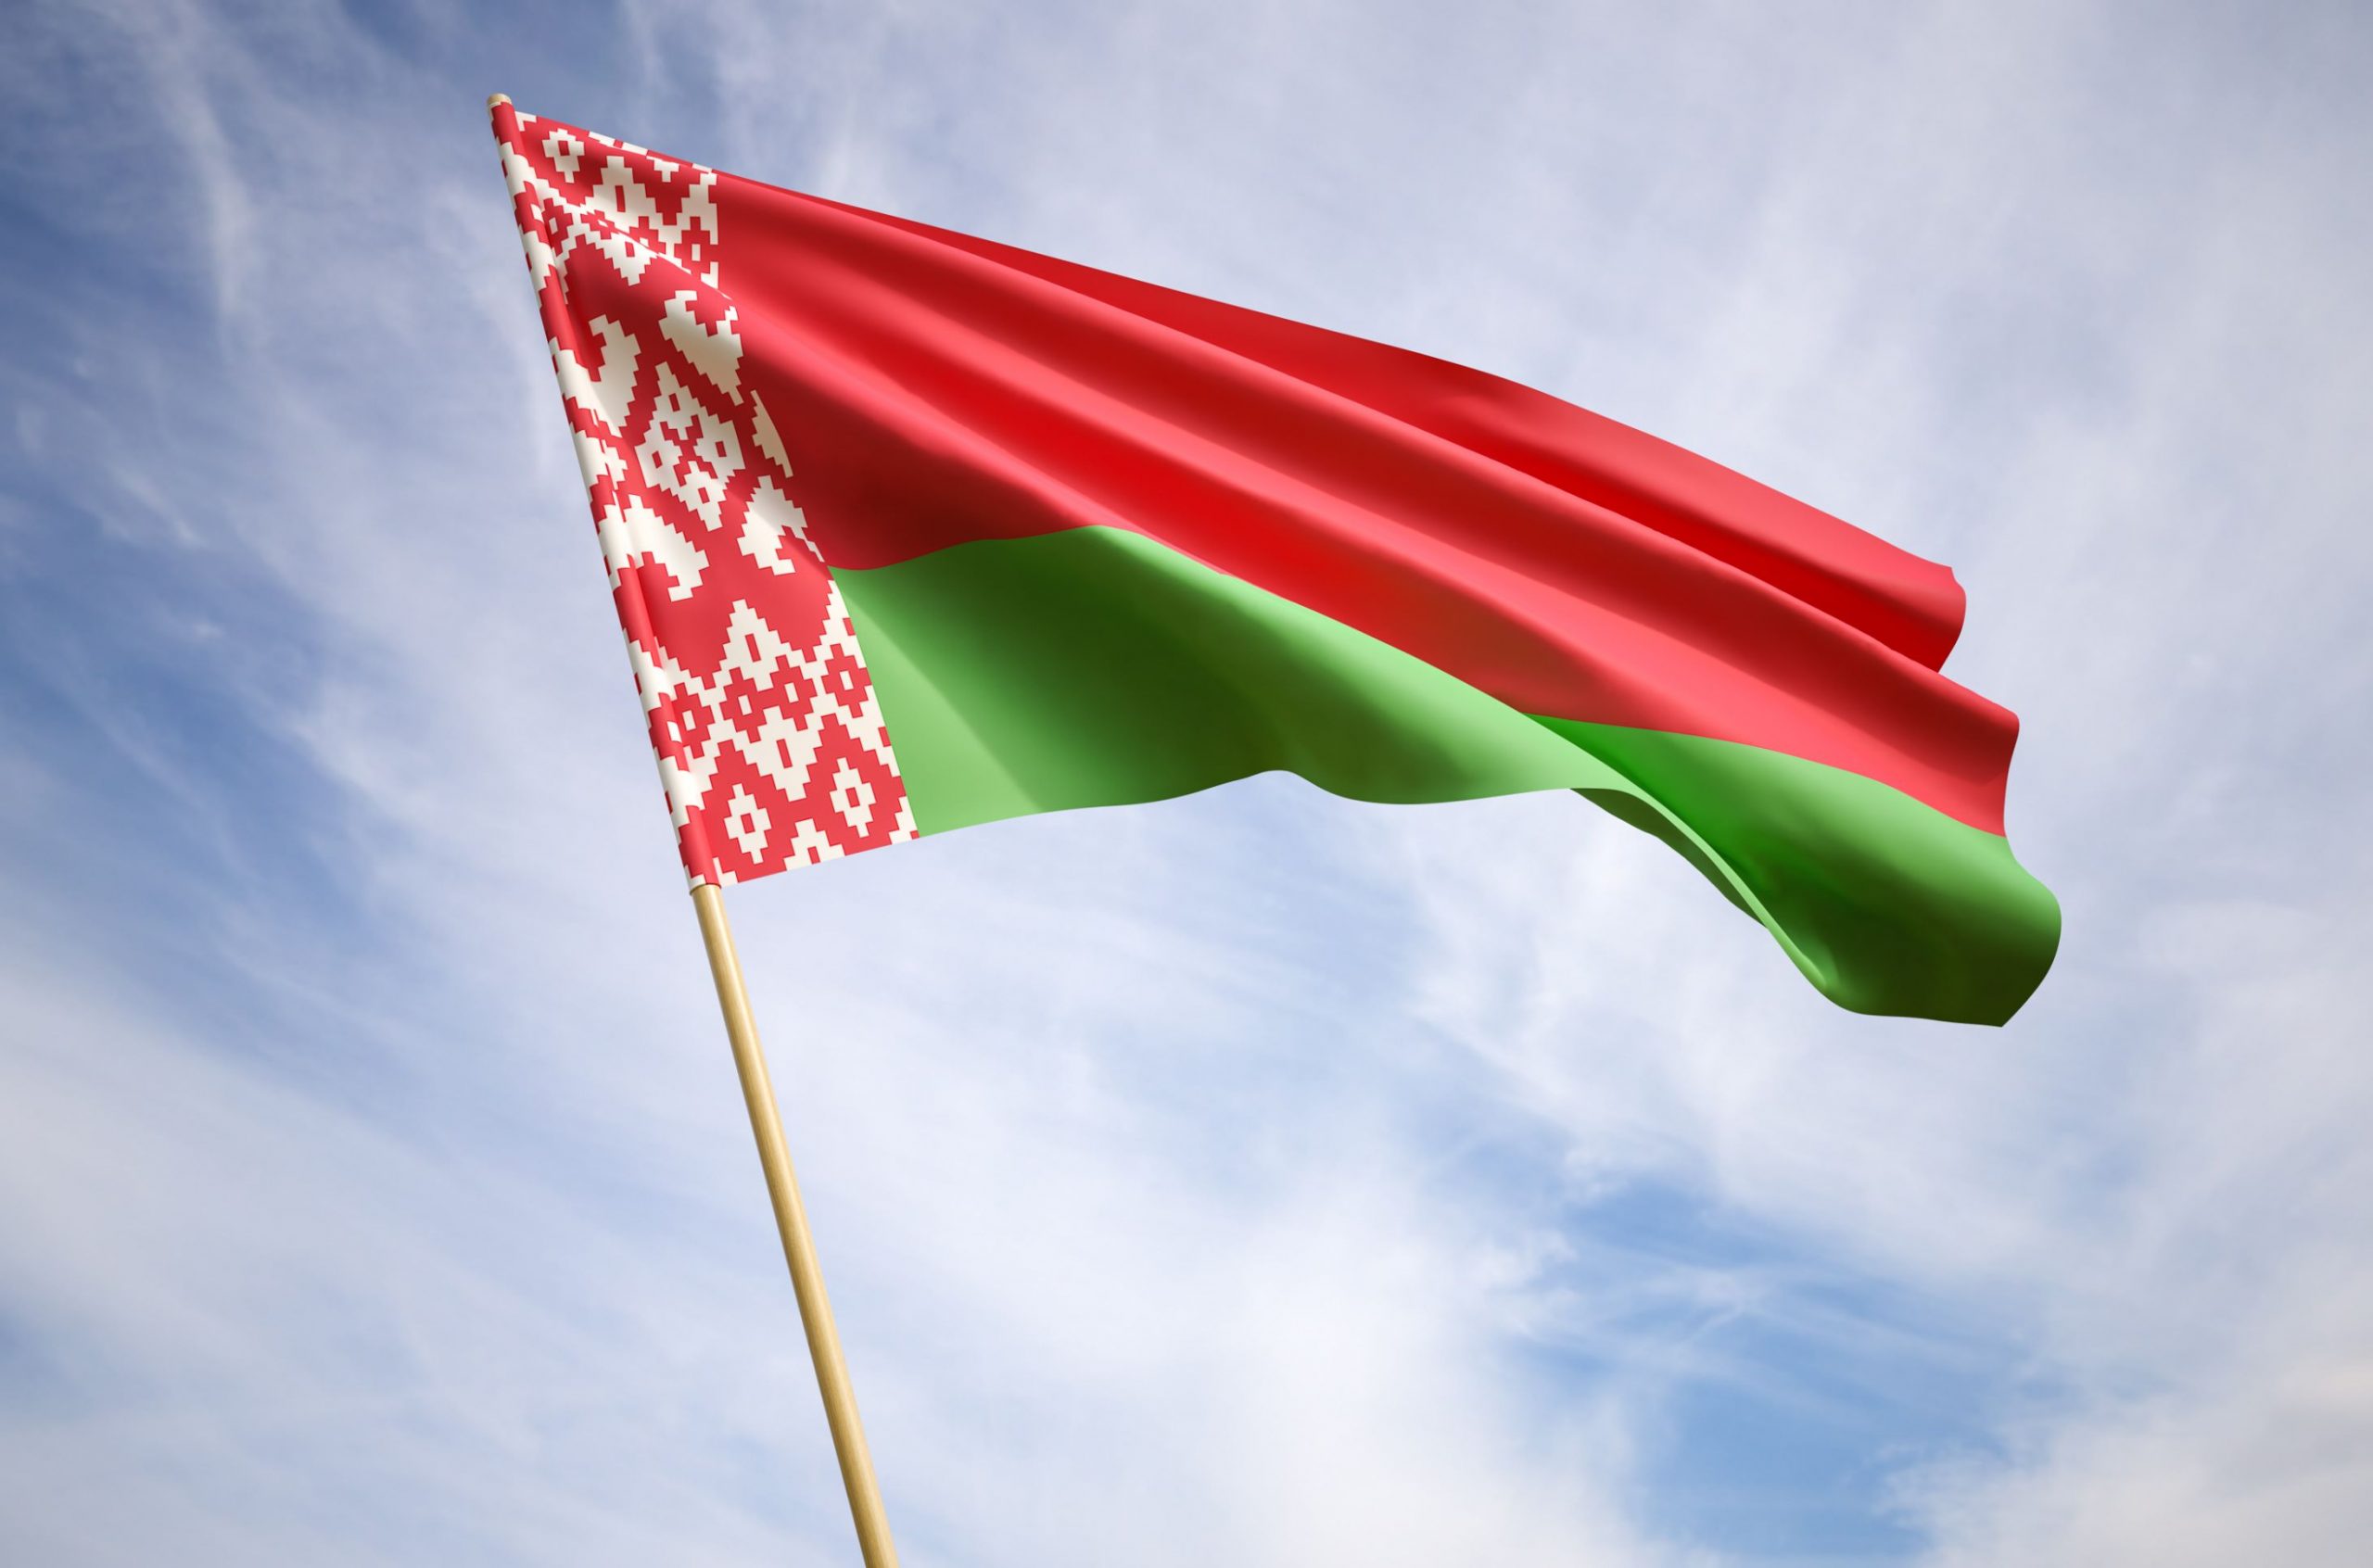 waving-the-national-flag-of-belarus-QL6RTRY-min-2-scaled